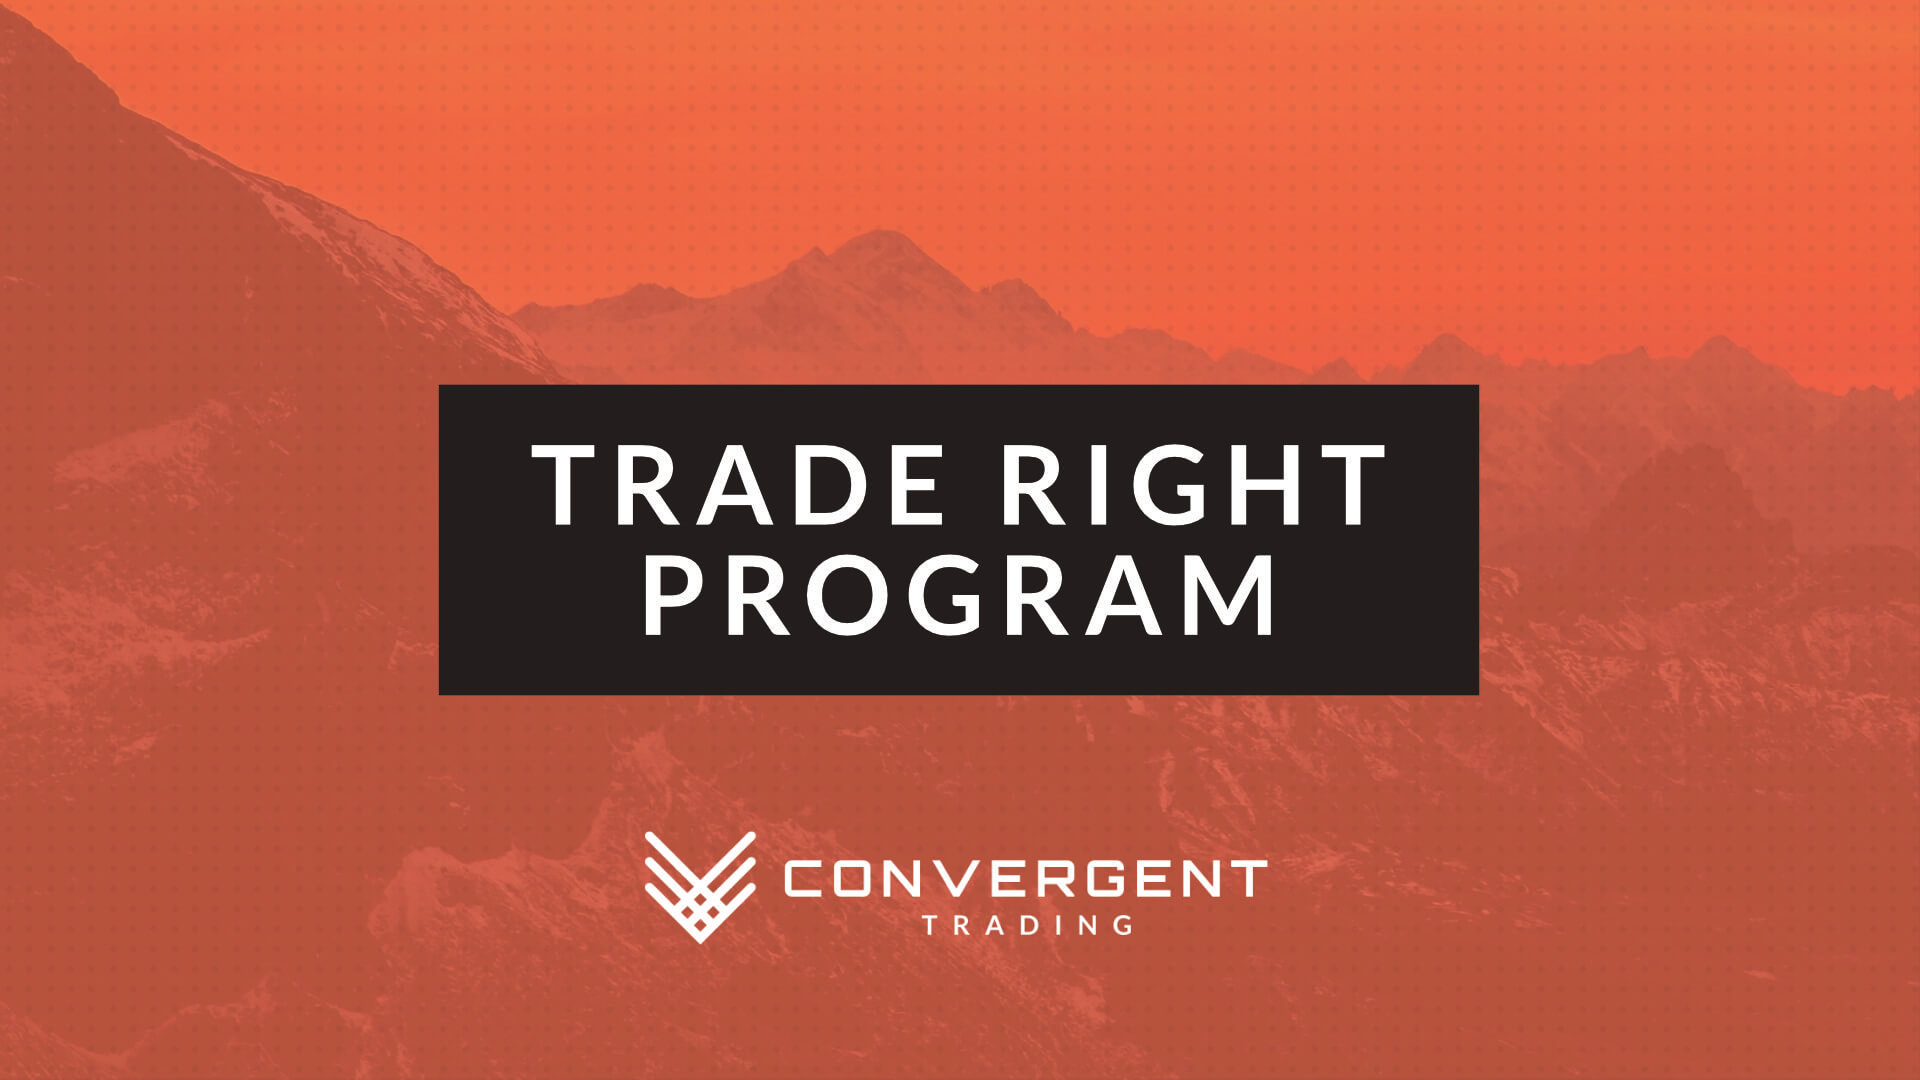 Trade Right with Convergent - Convergent Trading